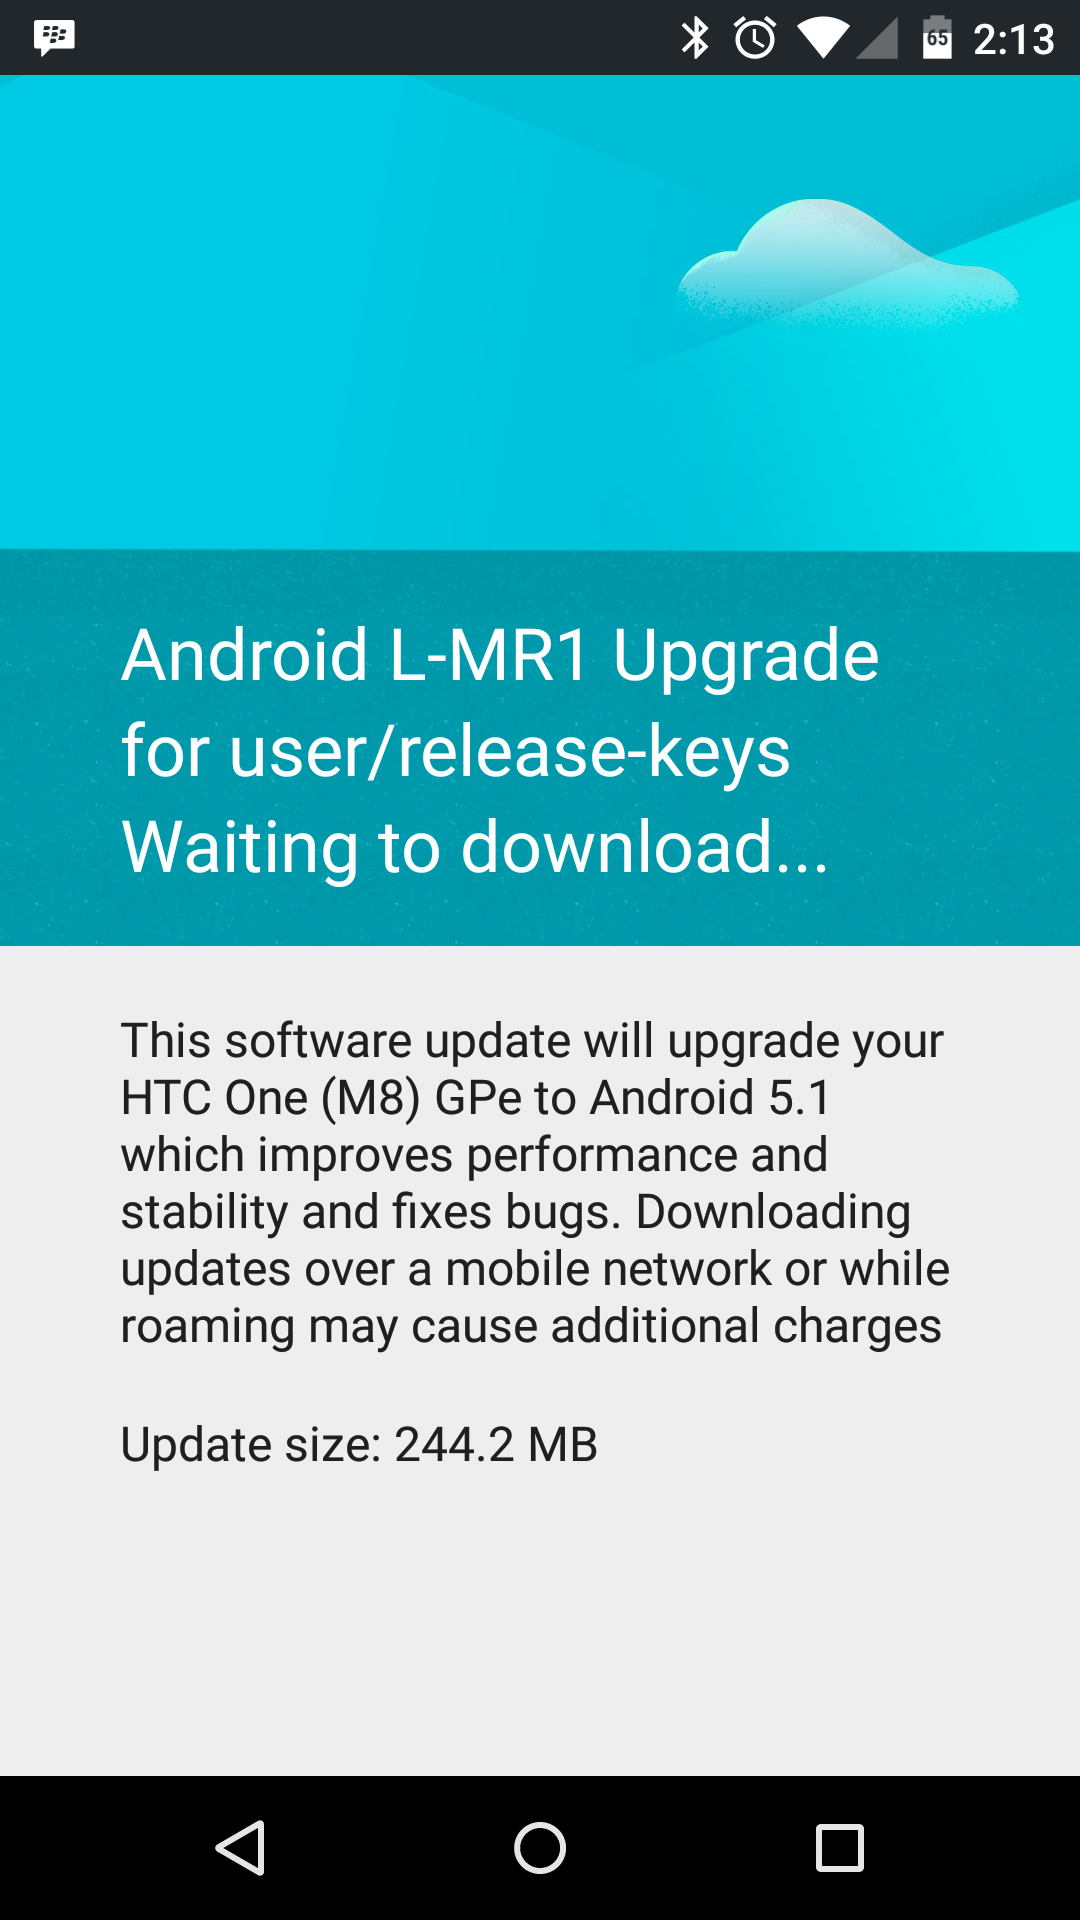 HTC One M8 GPe is now receiving the Android 5.1 update